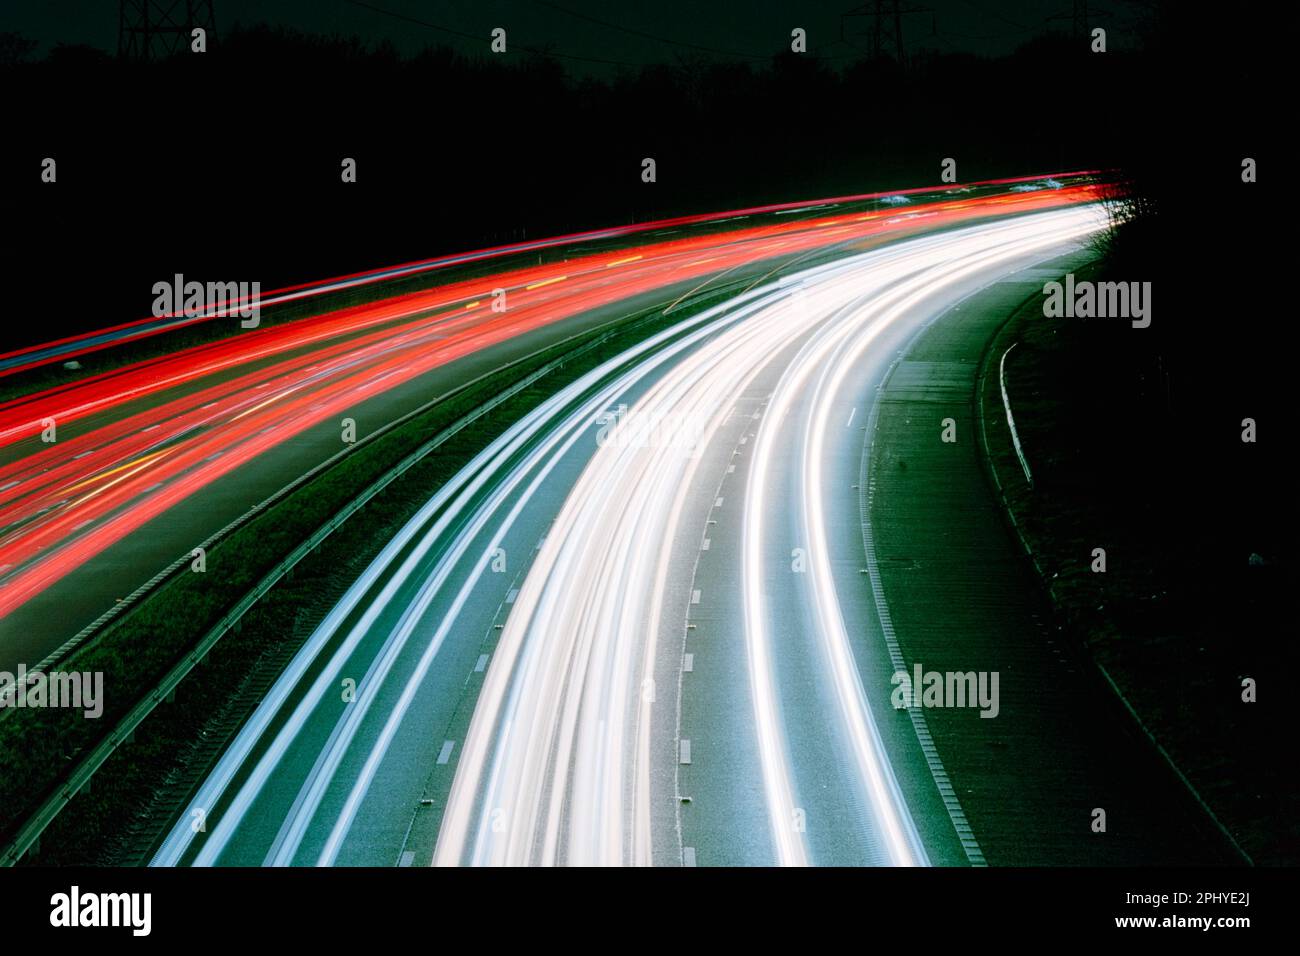 Light trails from moving traffic on the M60 motorway, Greater Manchester, England, UK. Theme or concept of travel, motion, speed, urban, commuting Stock Photo